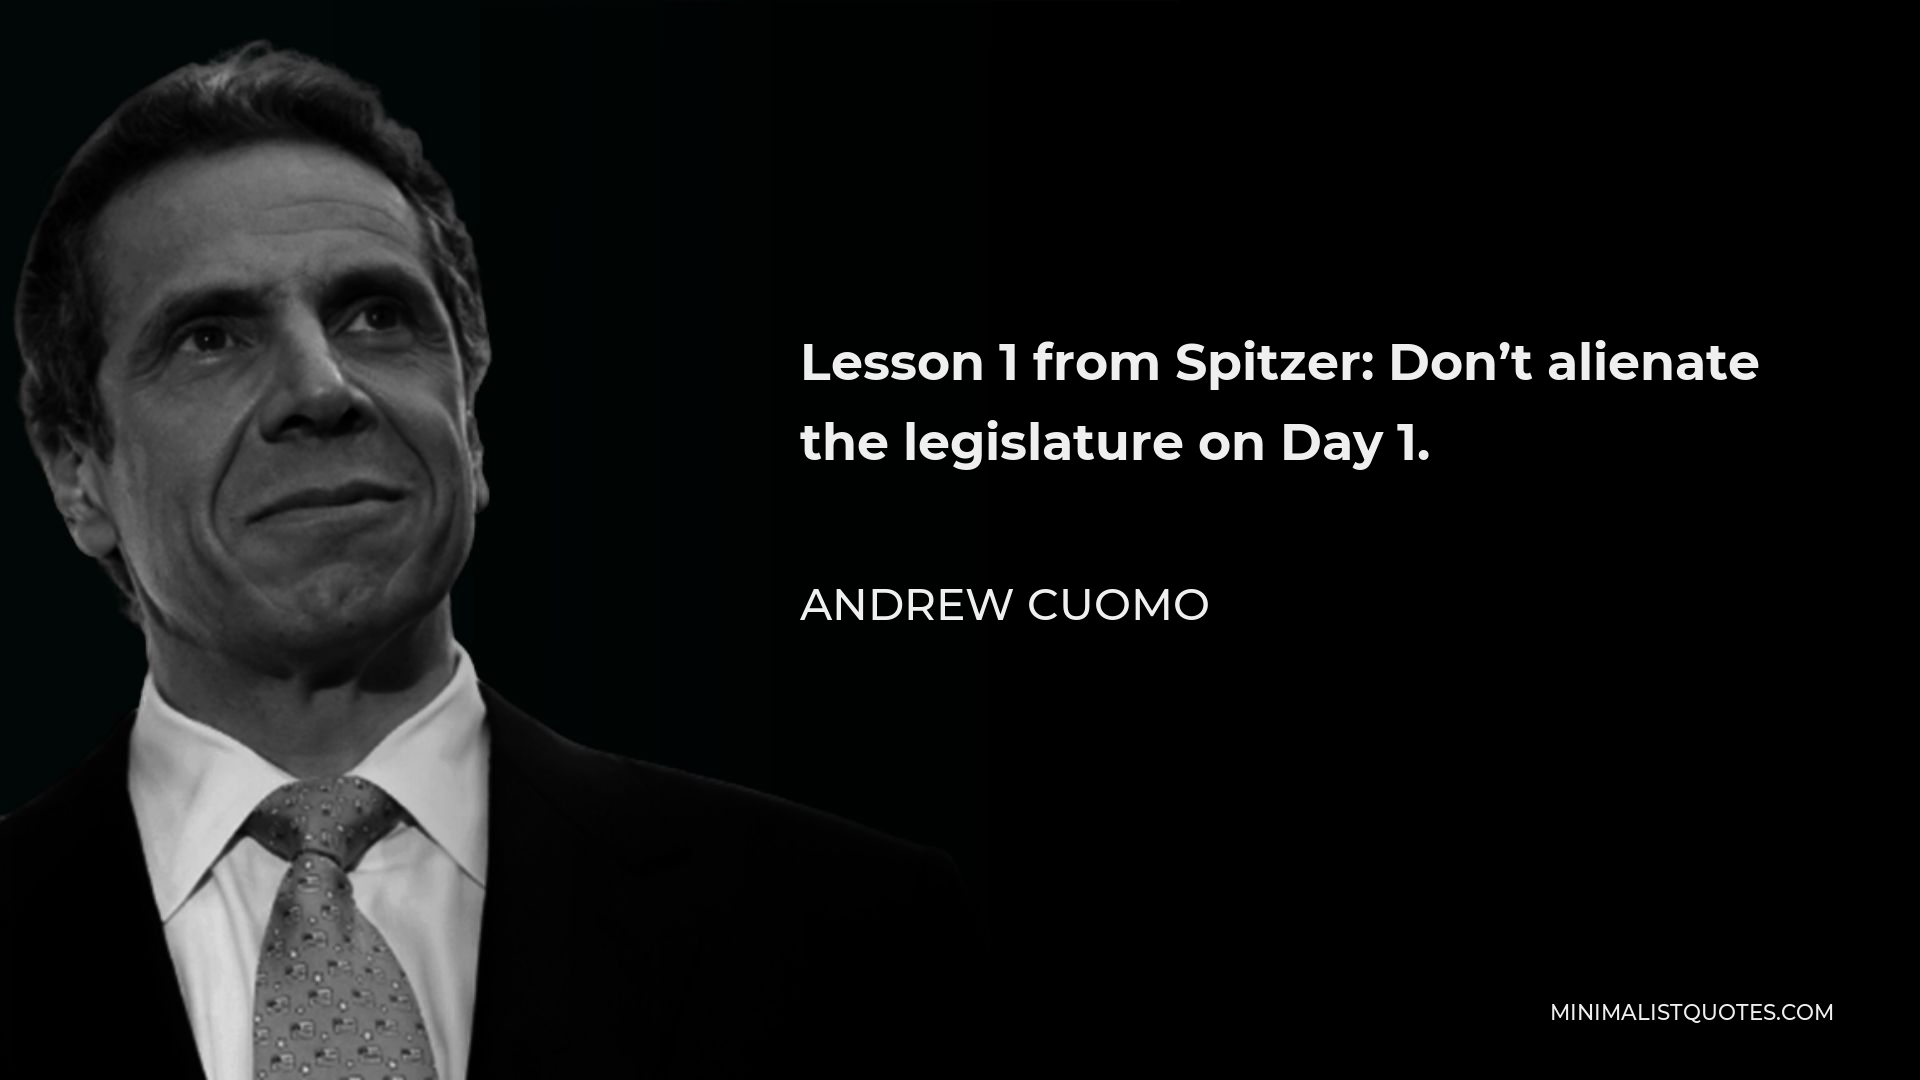 Andrew Cuomo Quote - Lesson 1 from Spitzer: Don’t alienate the legislature on Day 1.